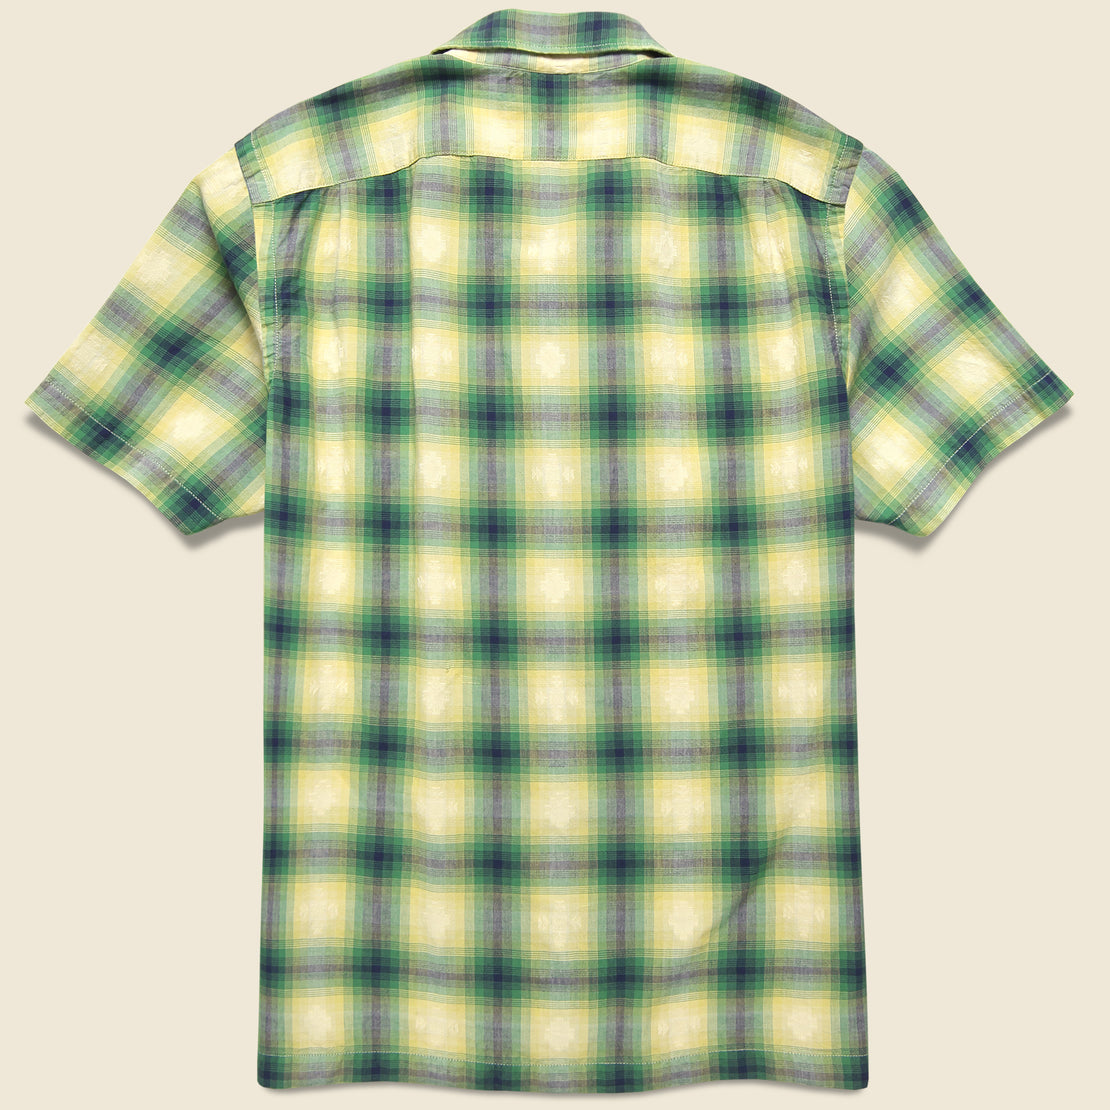 Dobby Plaid Camp Shirt - Green/Blue - RRL - STAG Provisions - Tops - S/S Woven - Plaid